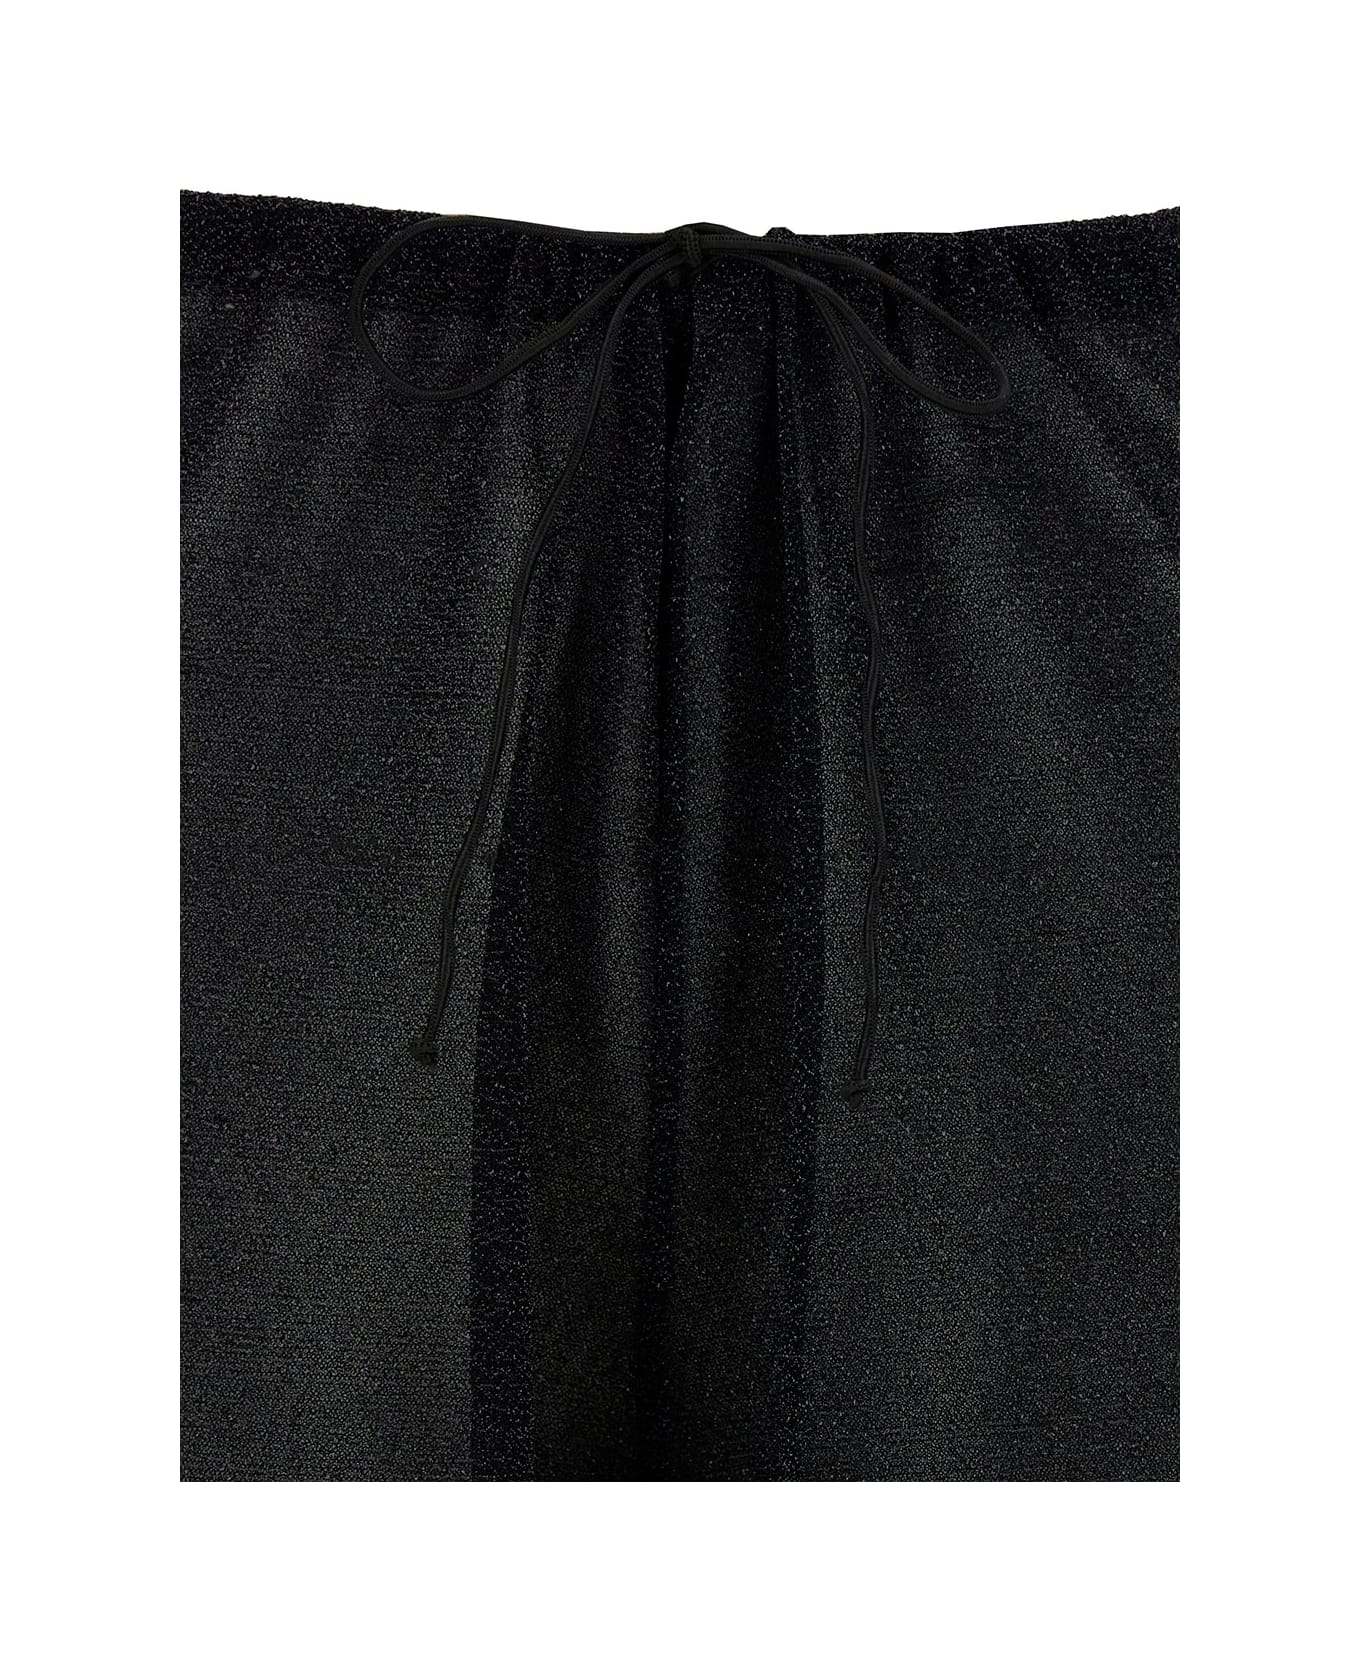 Oseree 'lumi Plumage' Black Pants With Feathers And Drawstring In Polyamide Blend Woman - Black